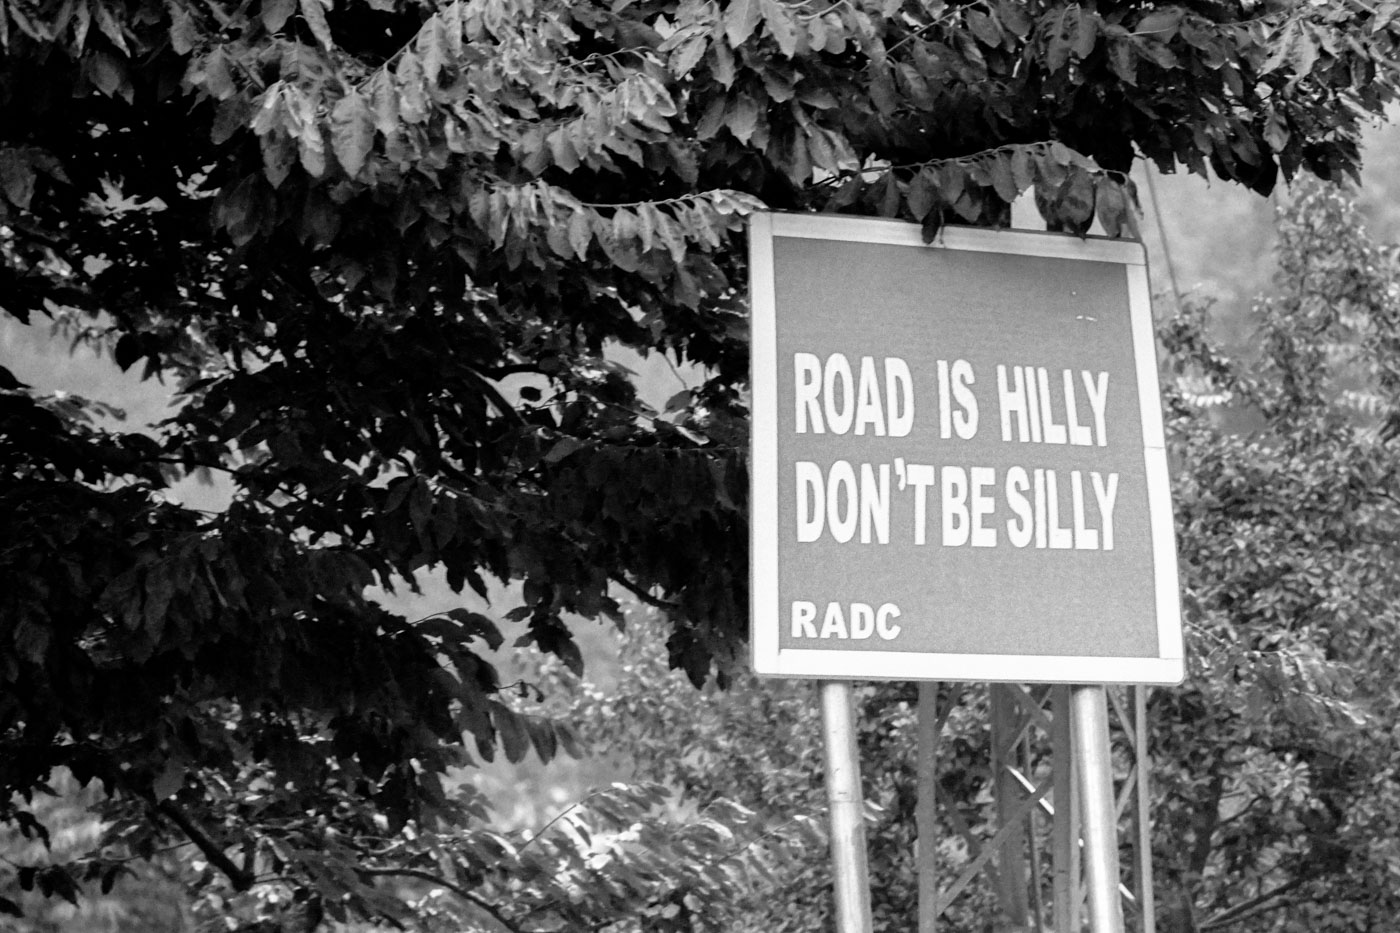 Placa dizendo Road is hilly, don't be silly